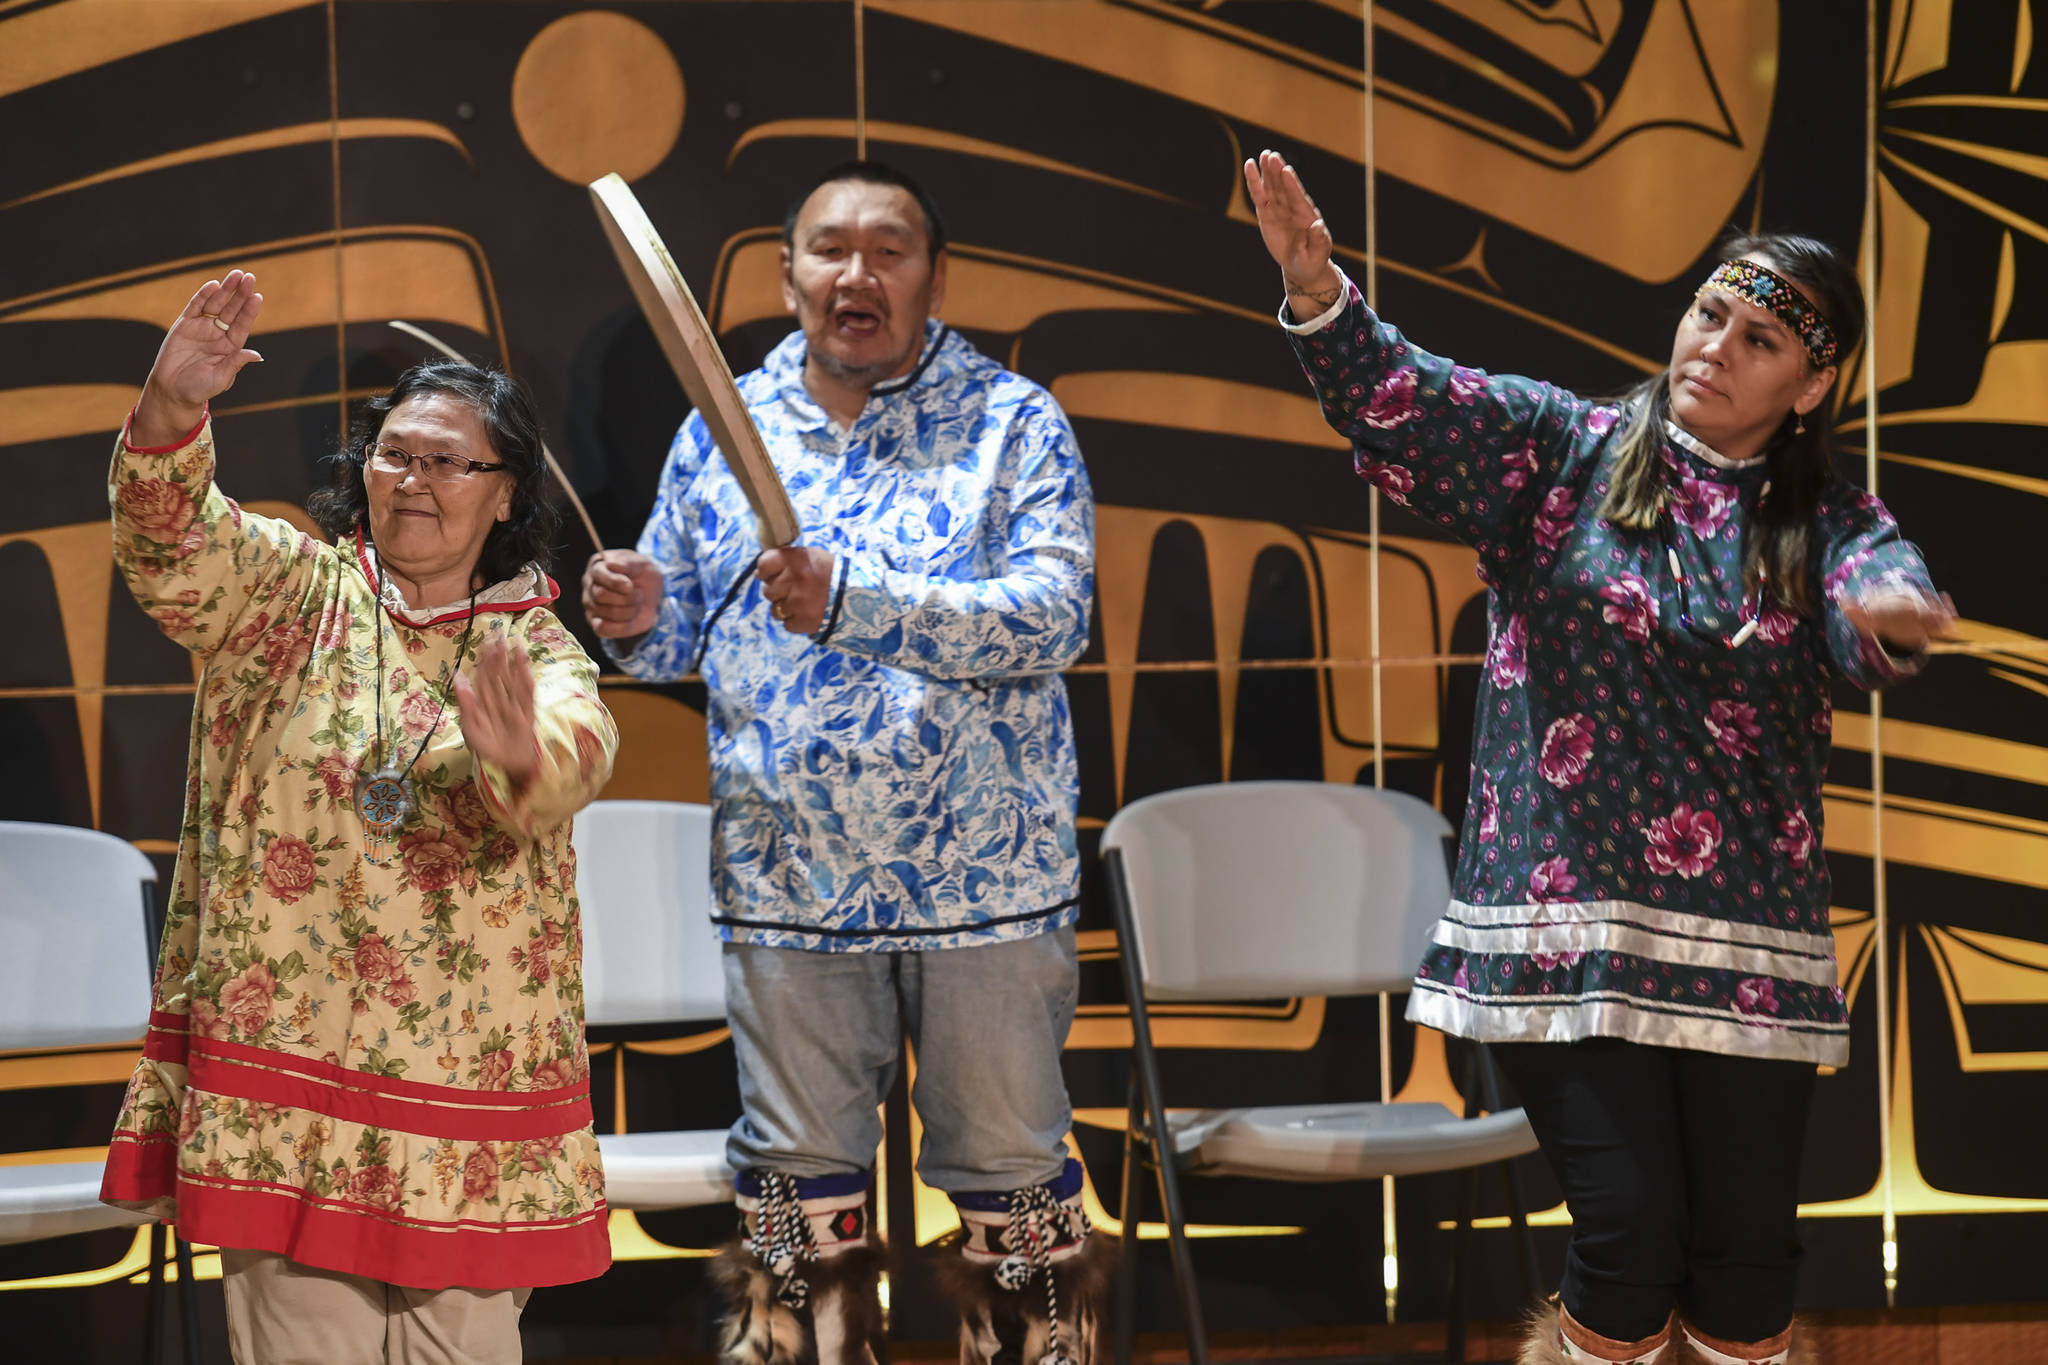 Sealaska Heritage Institute Artists-in-Residence John Waghiyi and his wife, Arlene Annogiyuk Waghiyi, of Savoonga, perform St. Lawrence Island dancing and song with their niece, Rana Mokiyuk, right, at the Walter Soboleff Center on Wednesday, Aug. 28, 2019. (Michael Penn | Juneau Empire)